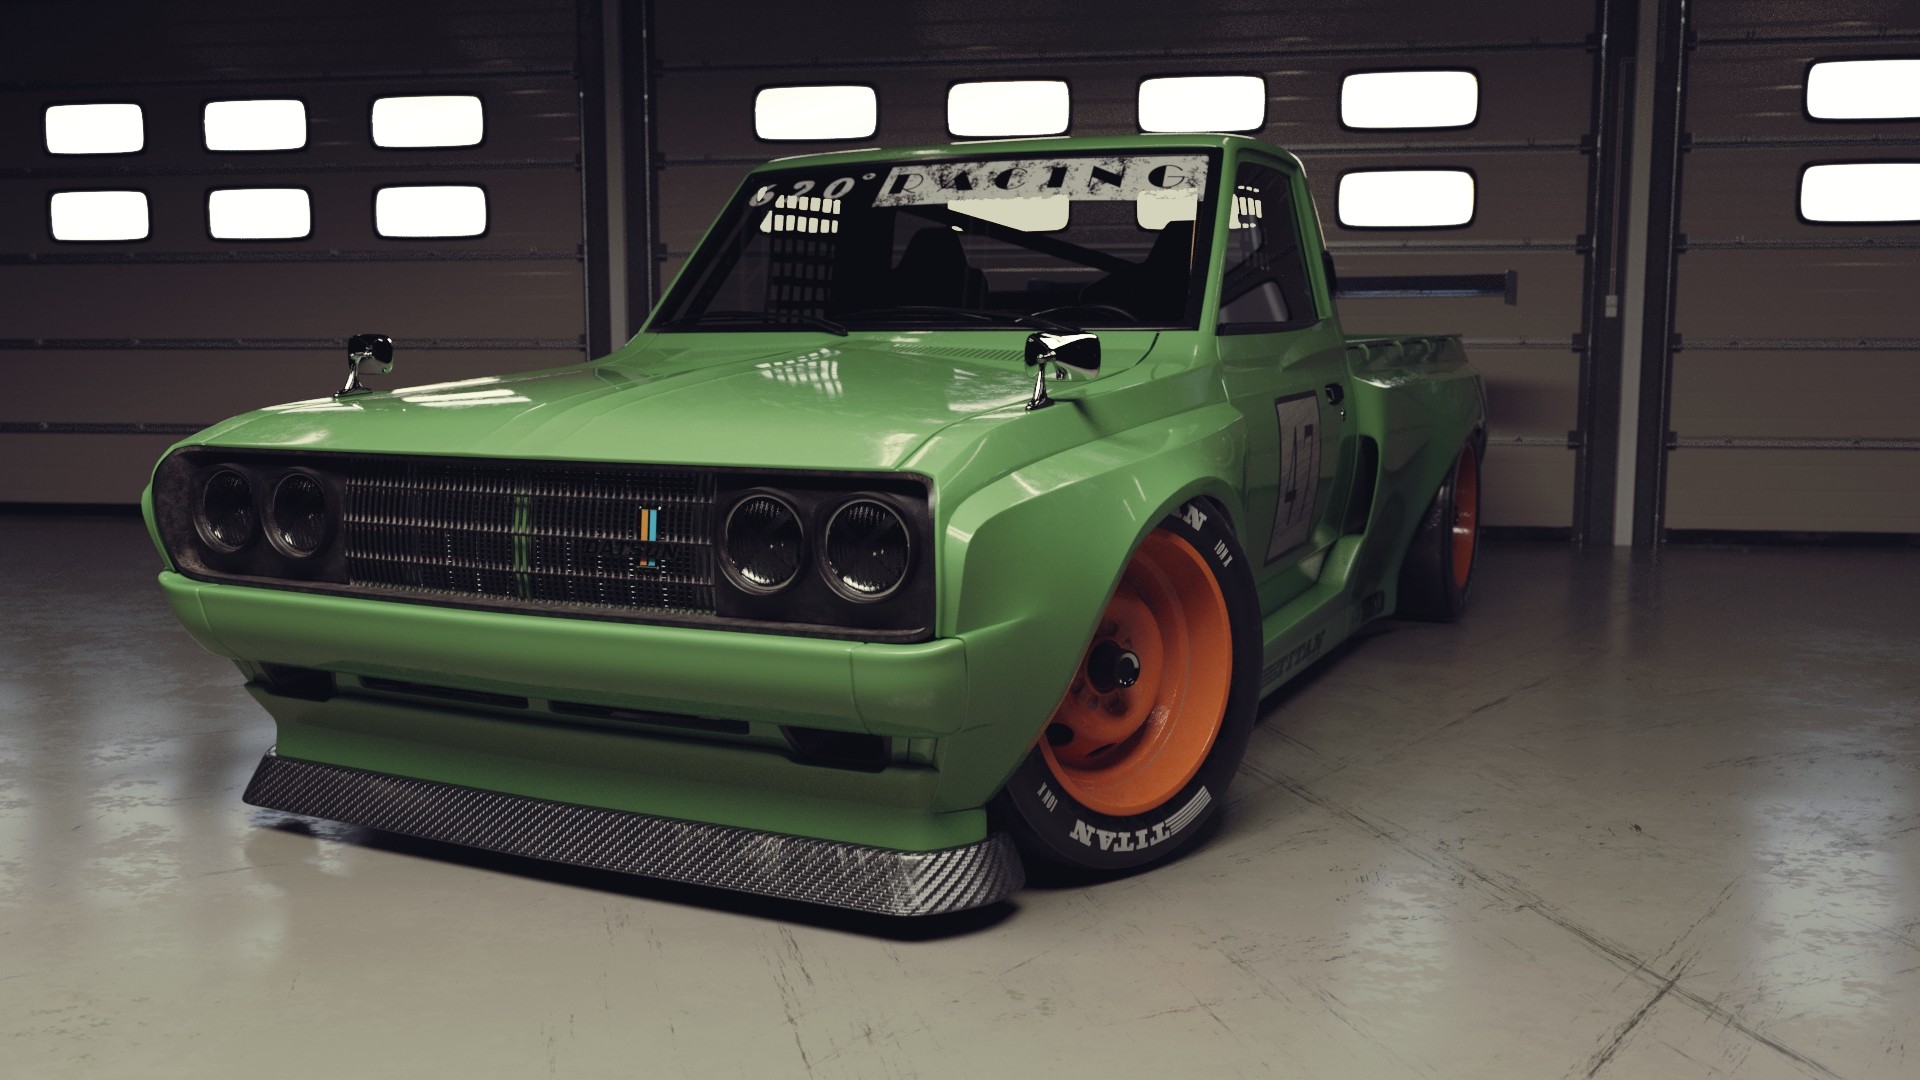 Modded version of the Datsun 620, lowered and widened for a fatter look. 